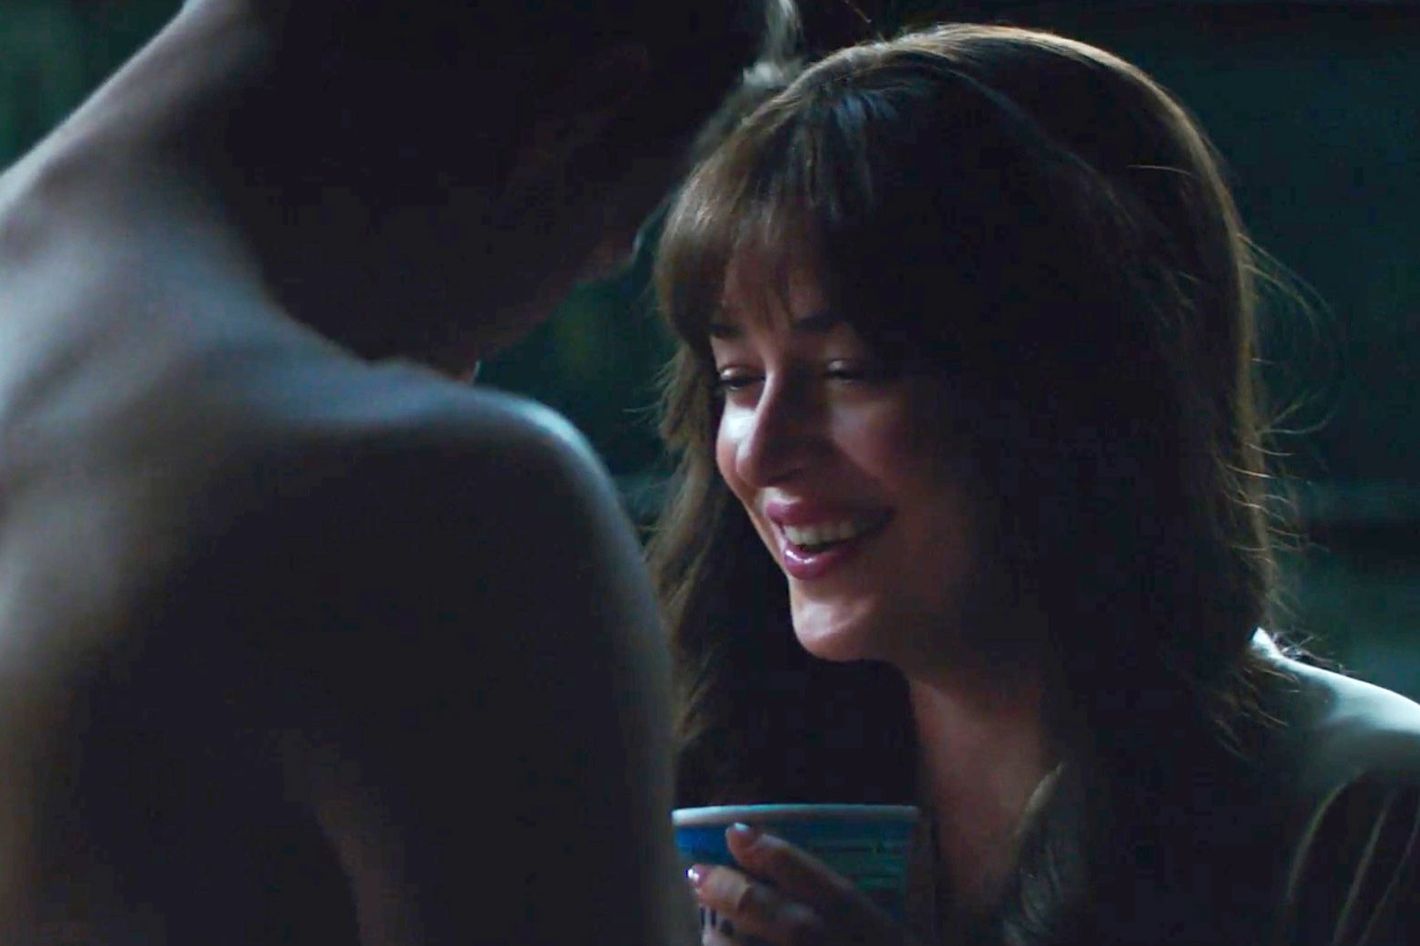 Www Ex Video Download Com - We Asked a Gyno About That Fifty Shades Ice Cream Scene